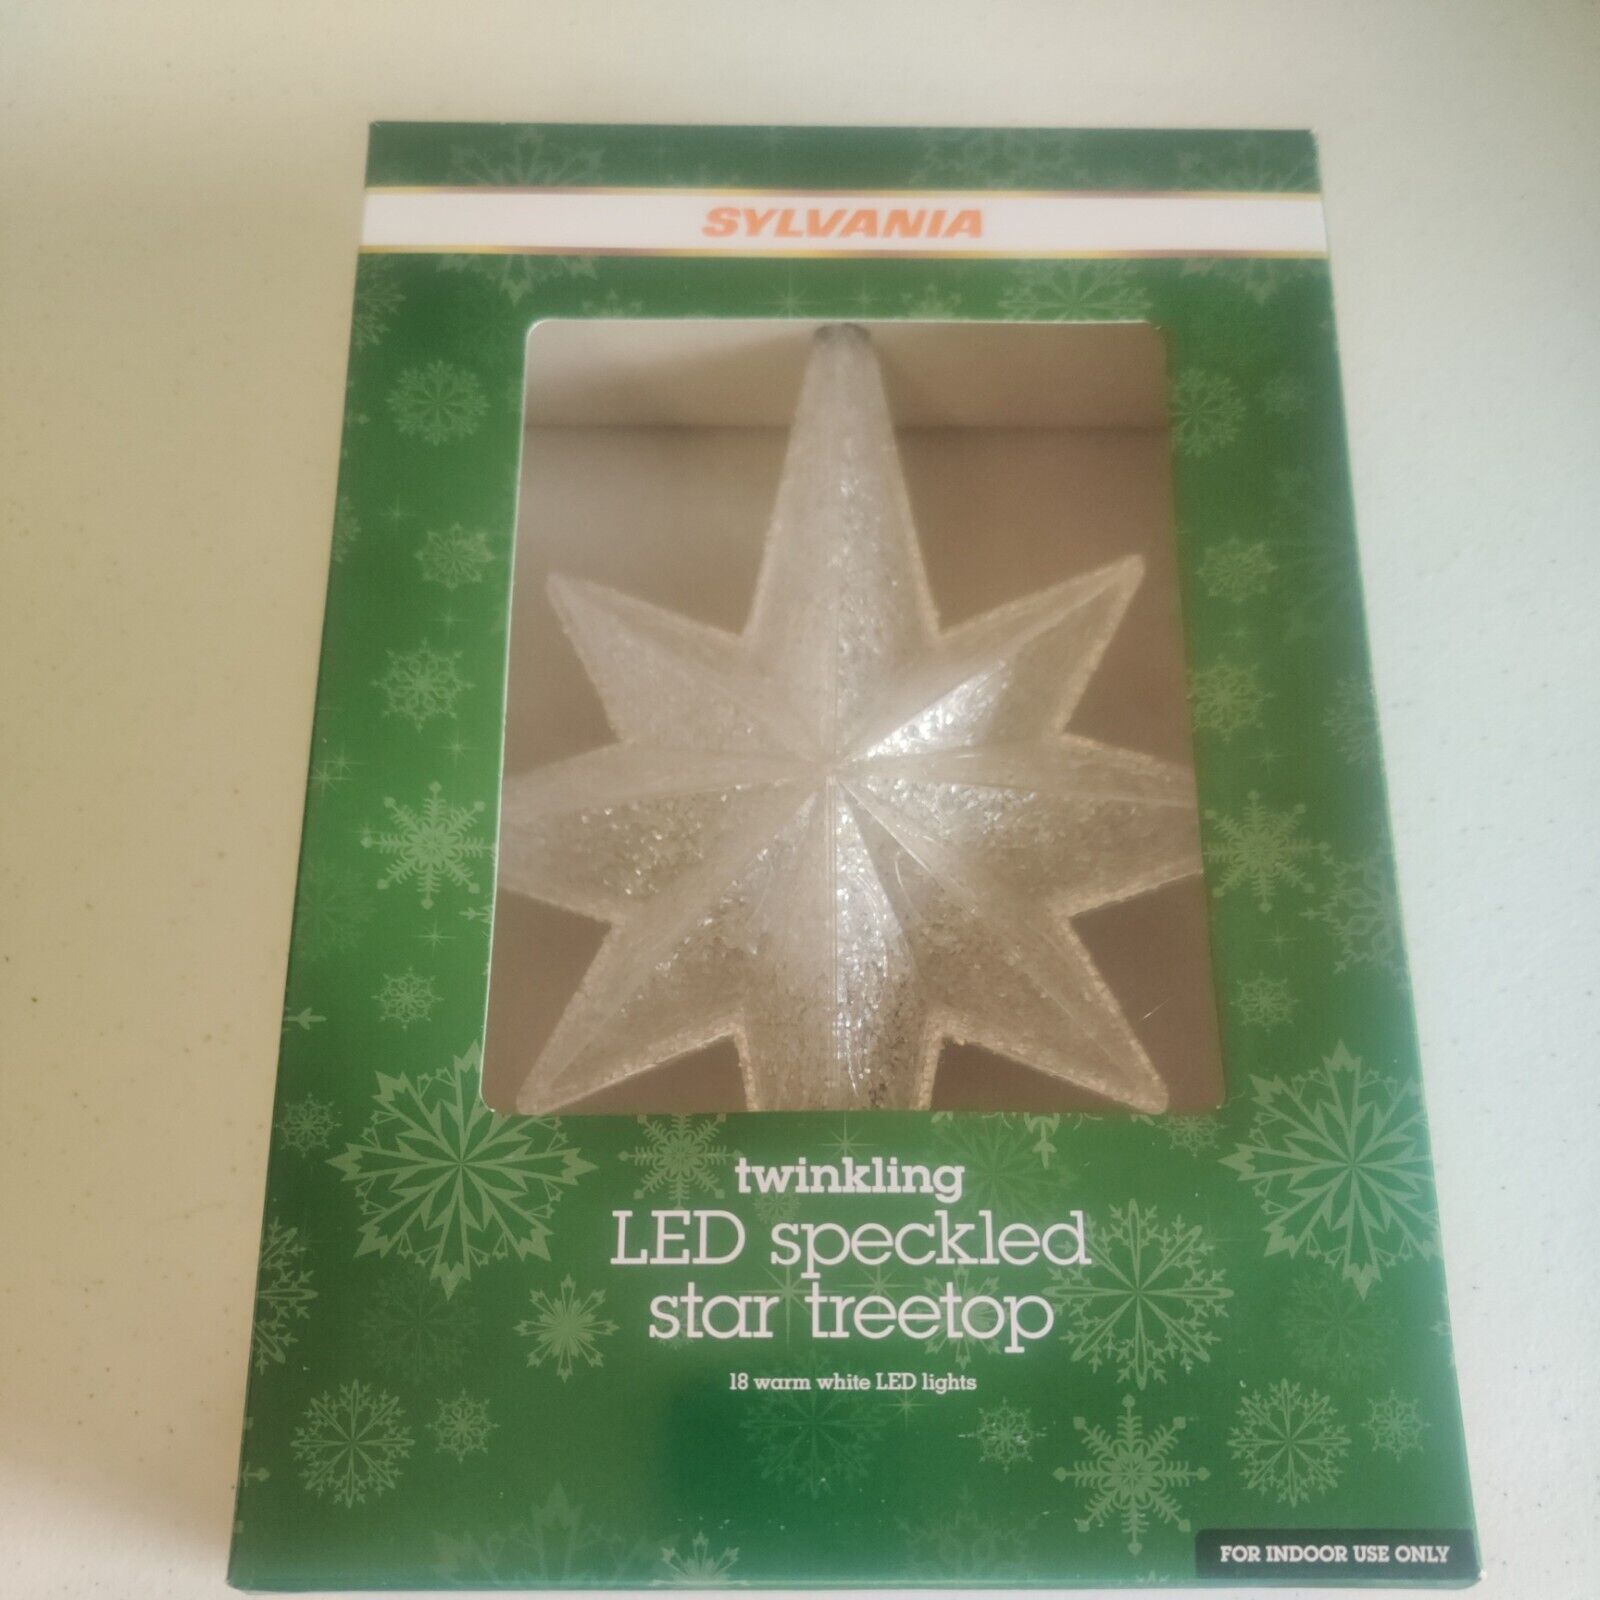 Sylvania LED Speckled twinkling Star Treetop new in box.